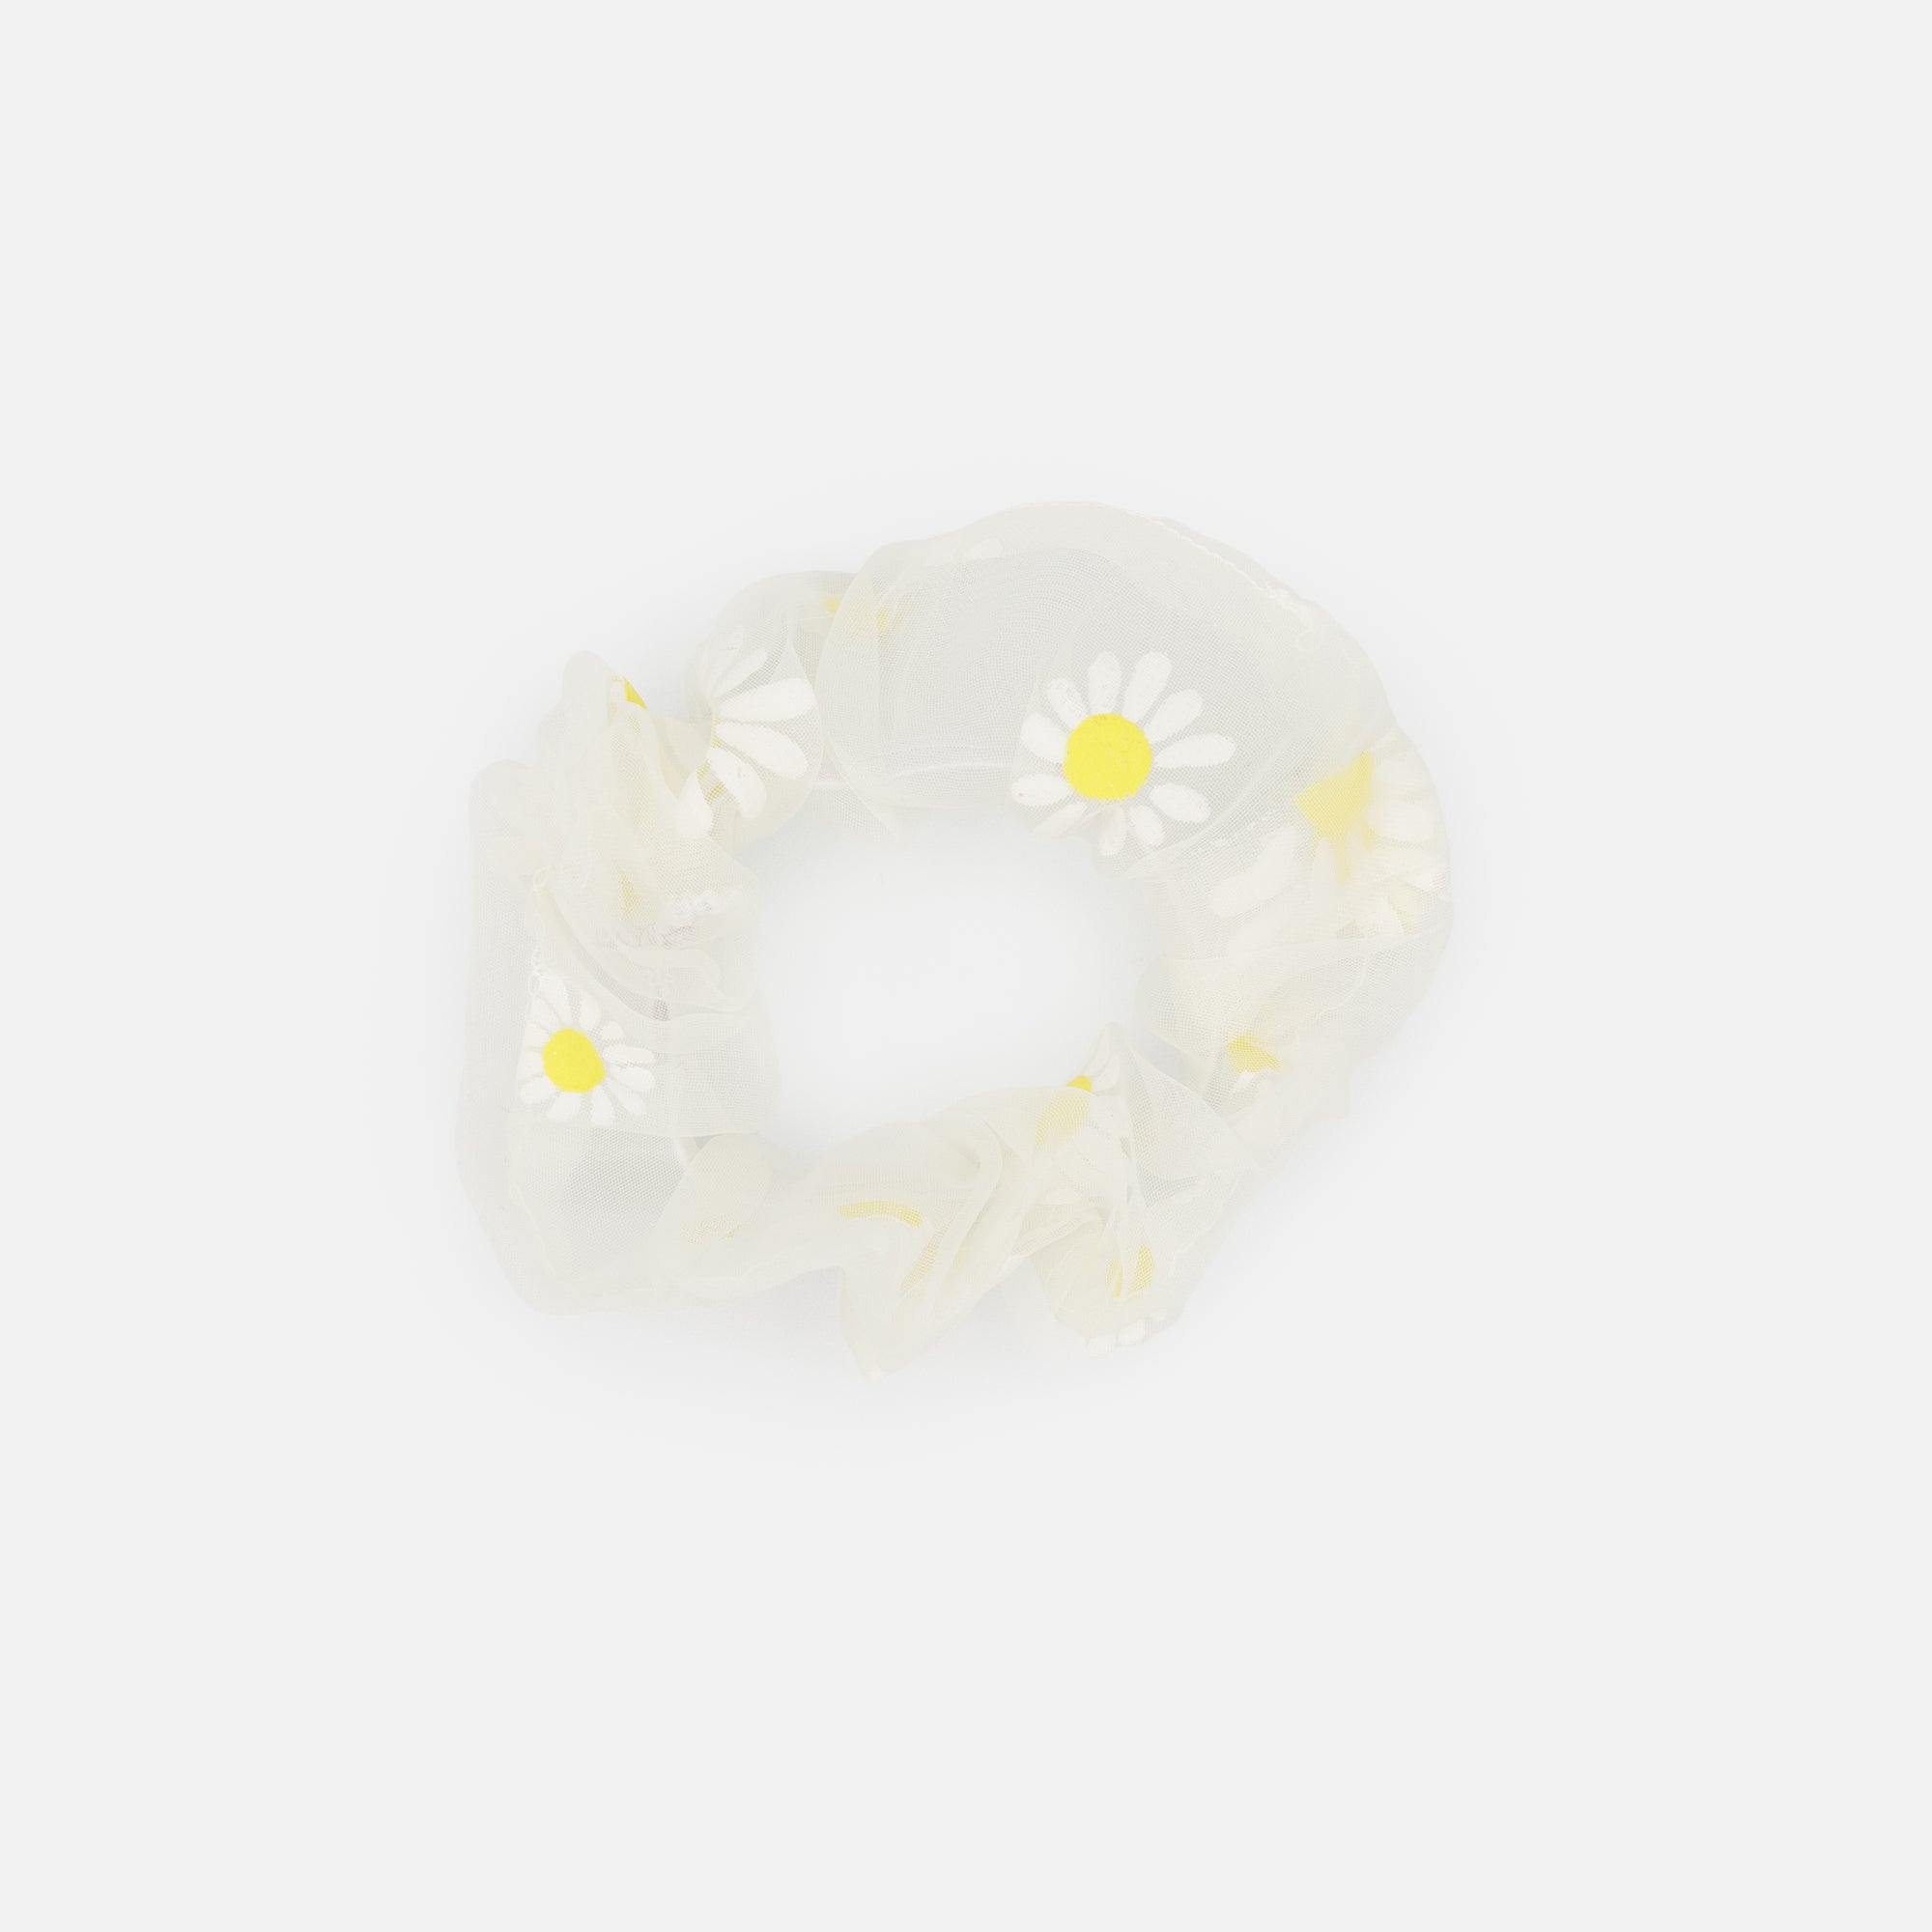 Duo of translucent blue and white scrunchies with daisies